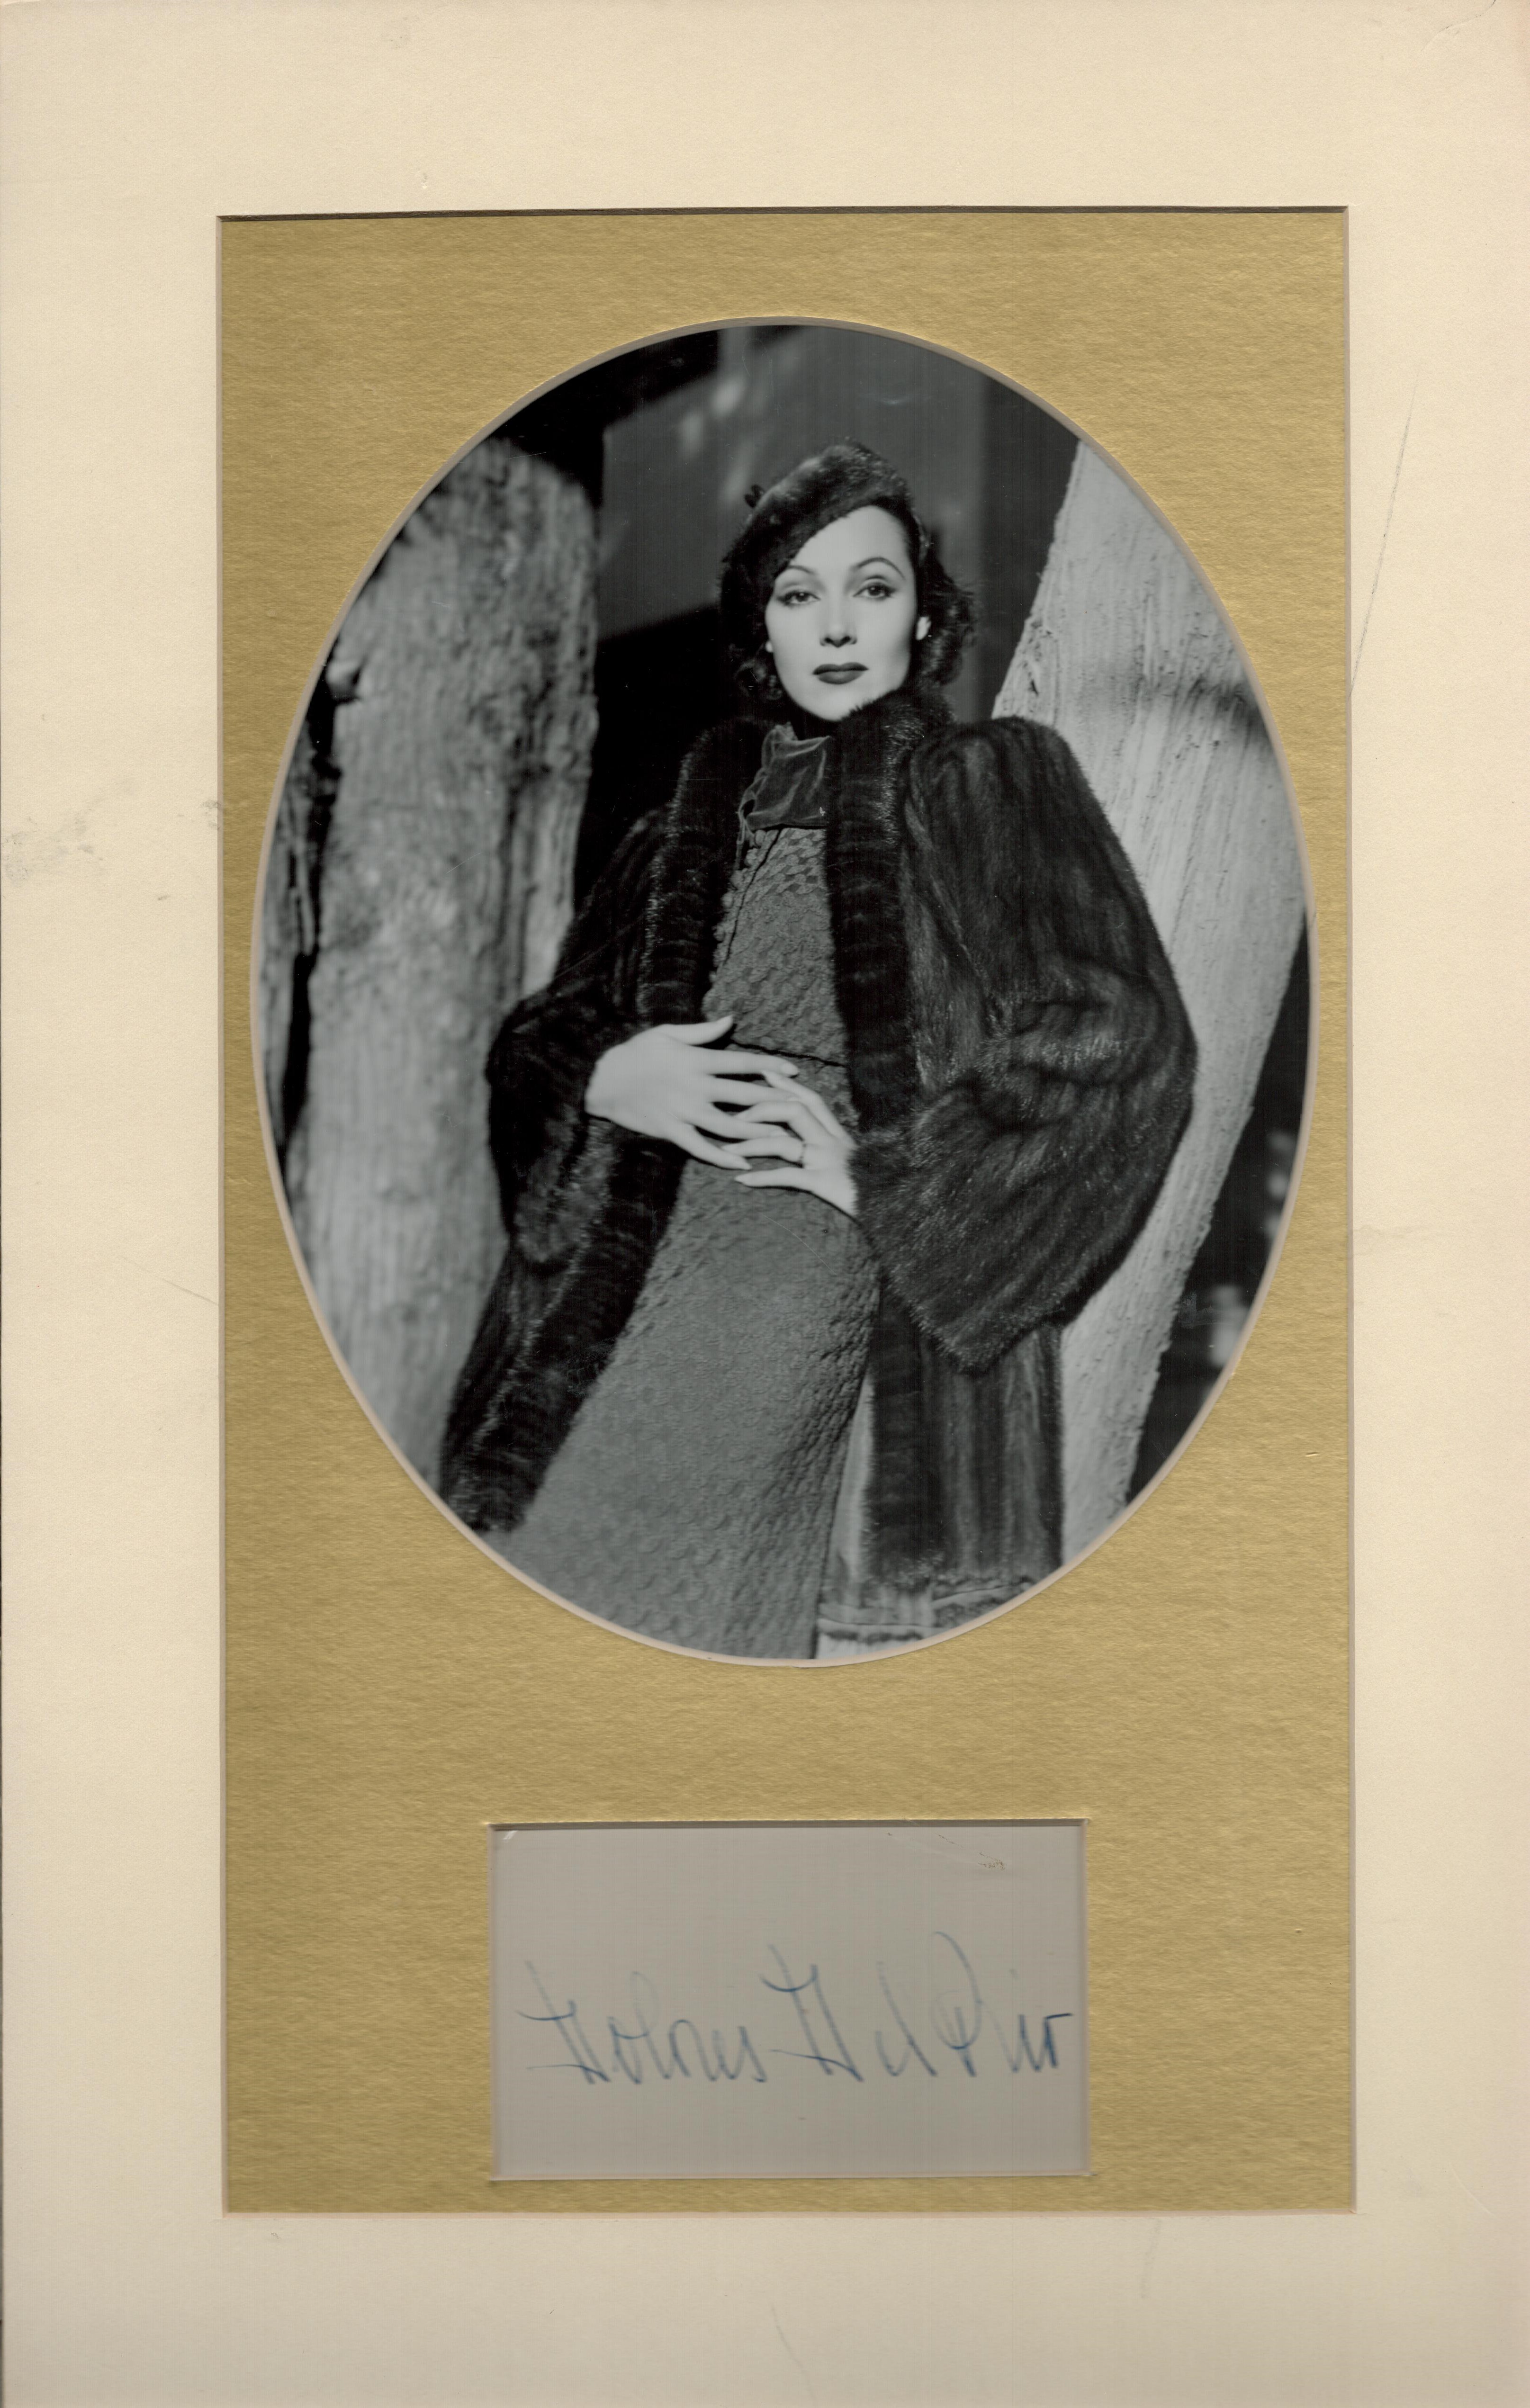 Dolores Del Rio 17x11 overall mounted signature piece includes signed album page and vintage black